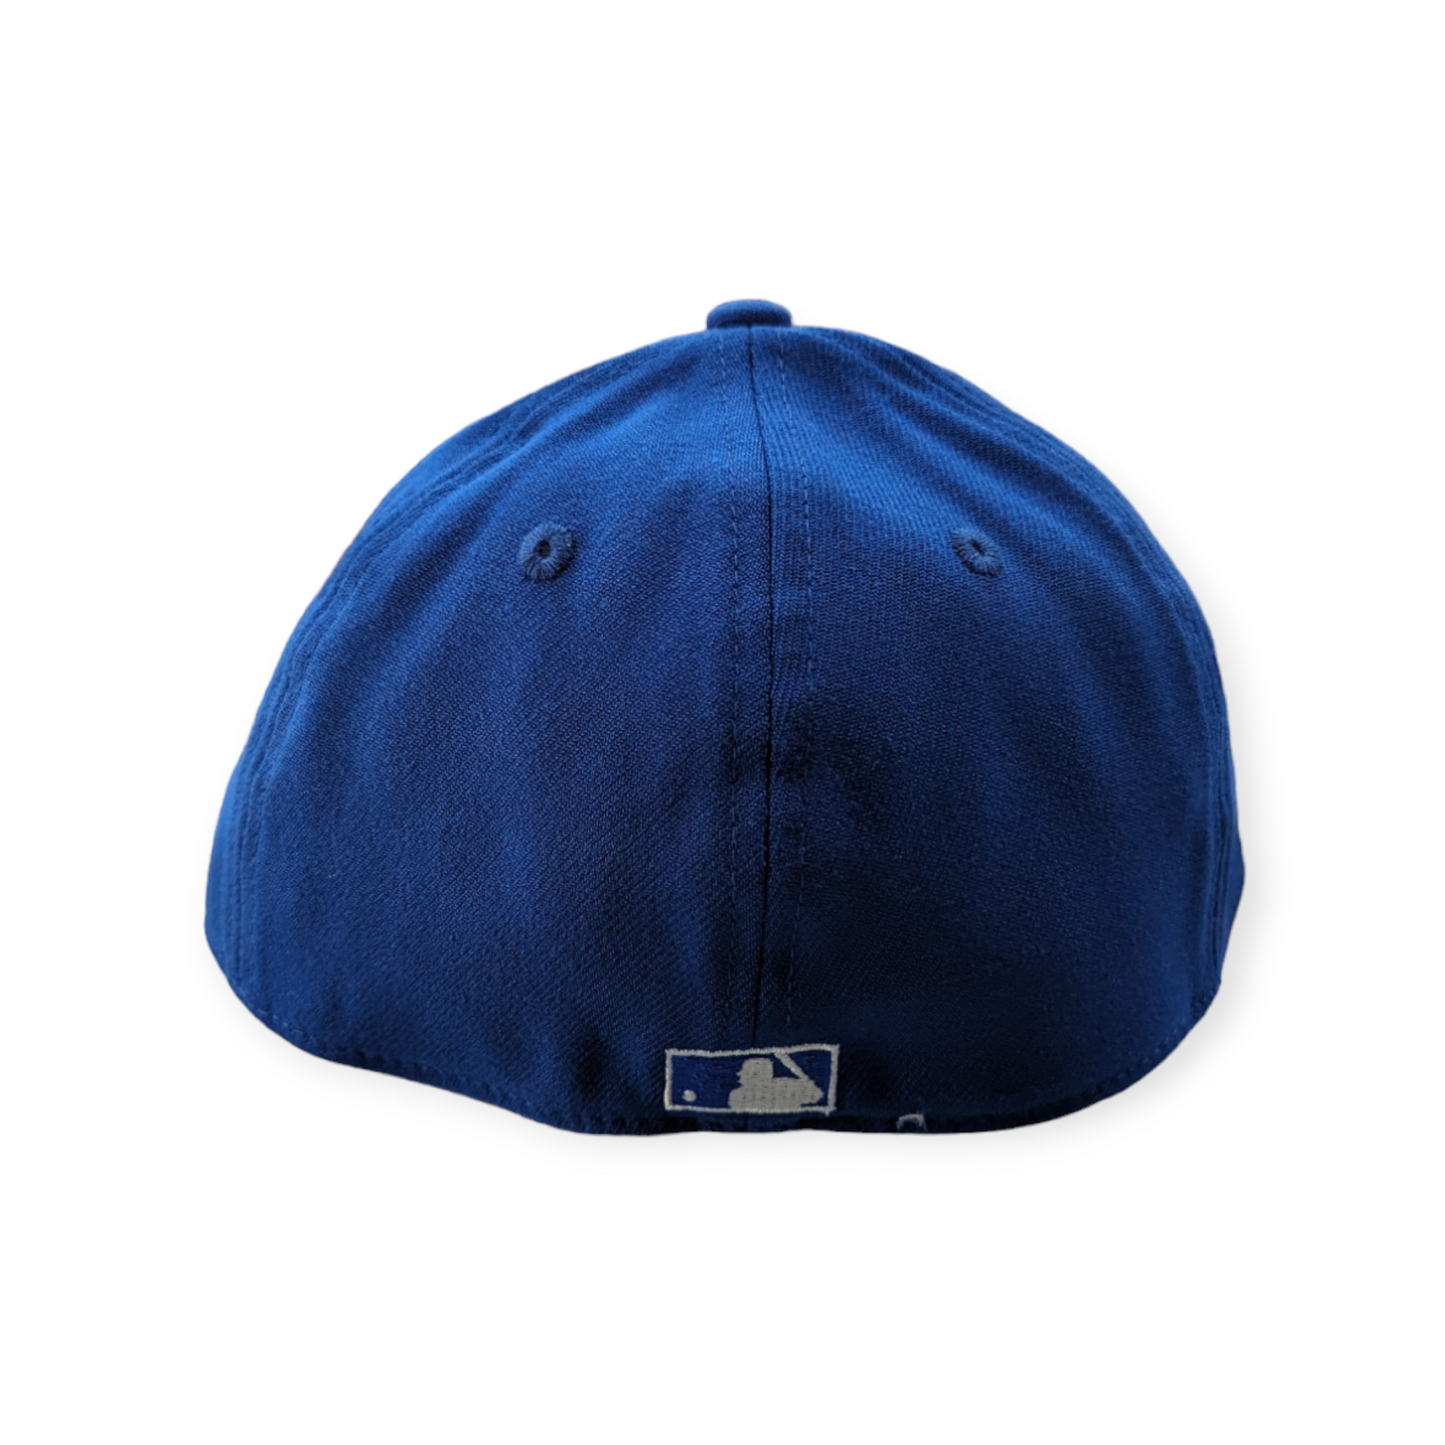 Chicago White Sox Classic 1969 Cooperstown Classics Royal Blue 39THIRTY Flex Fit New Era Hat